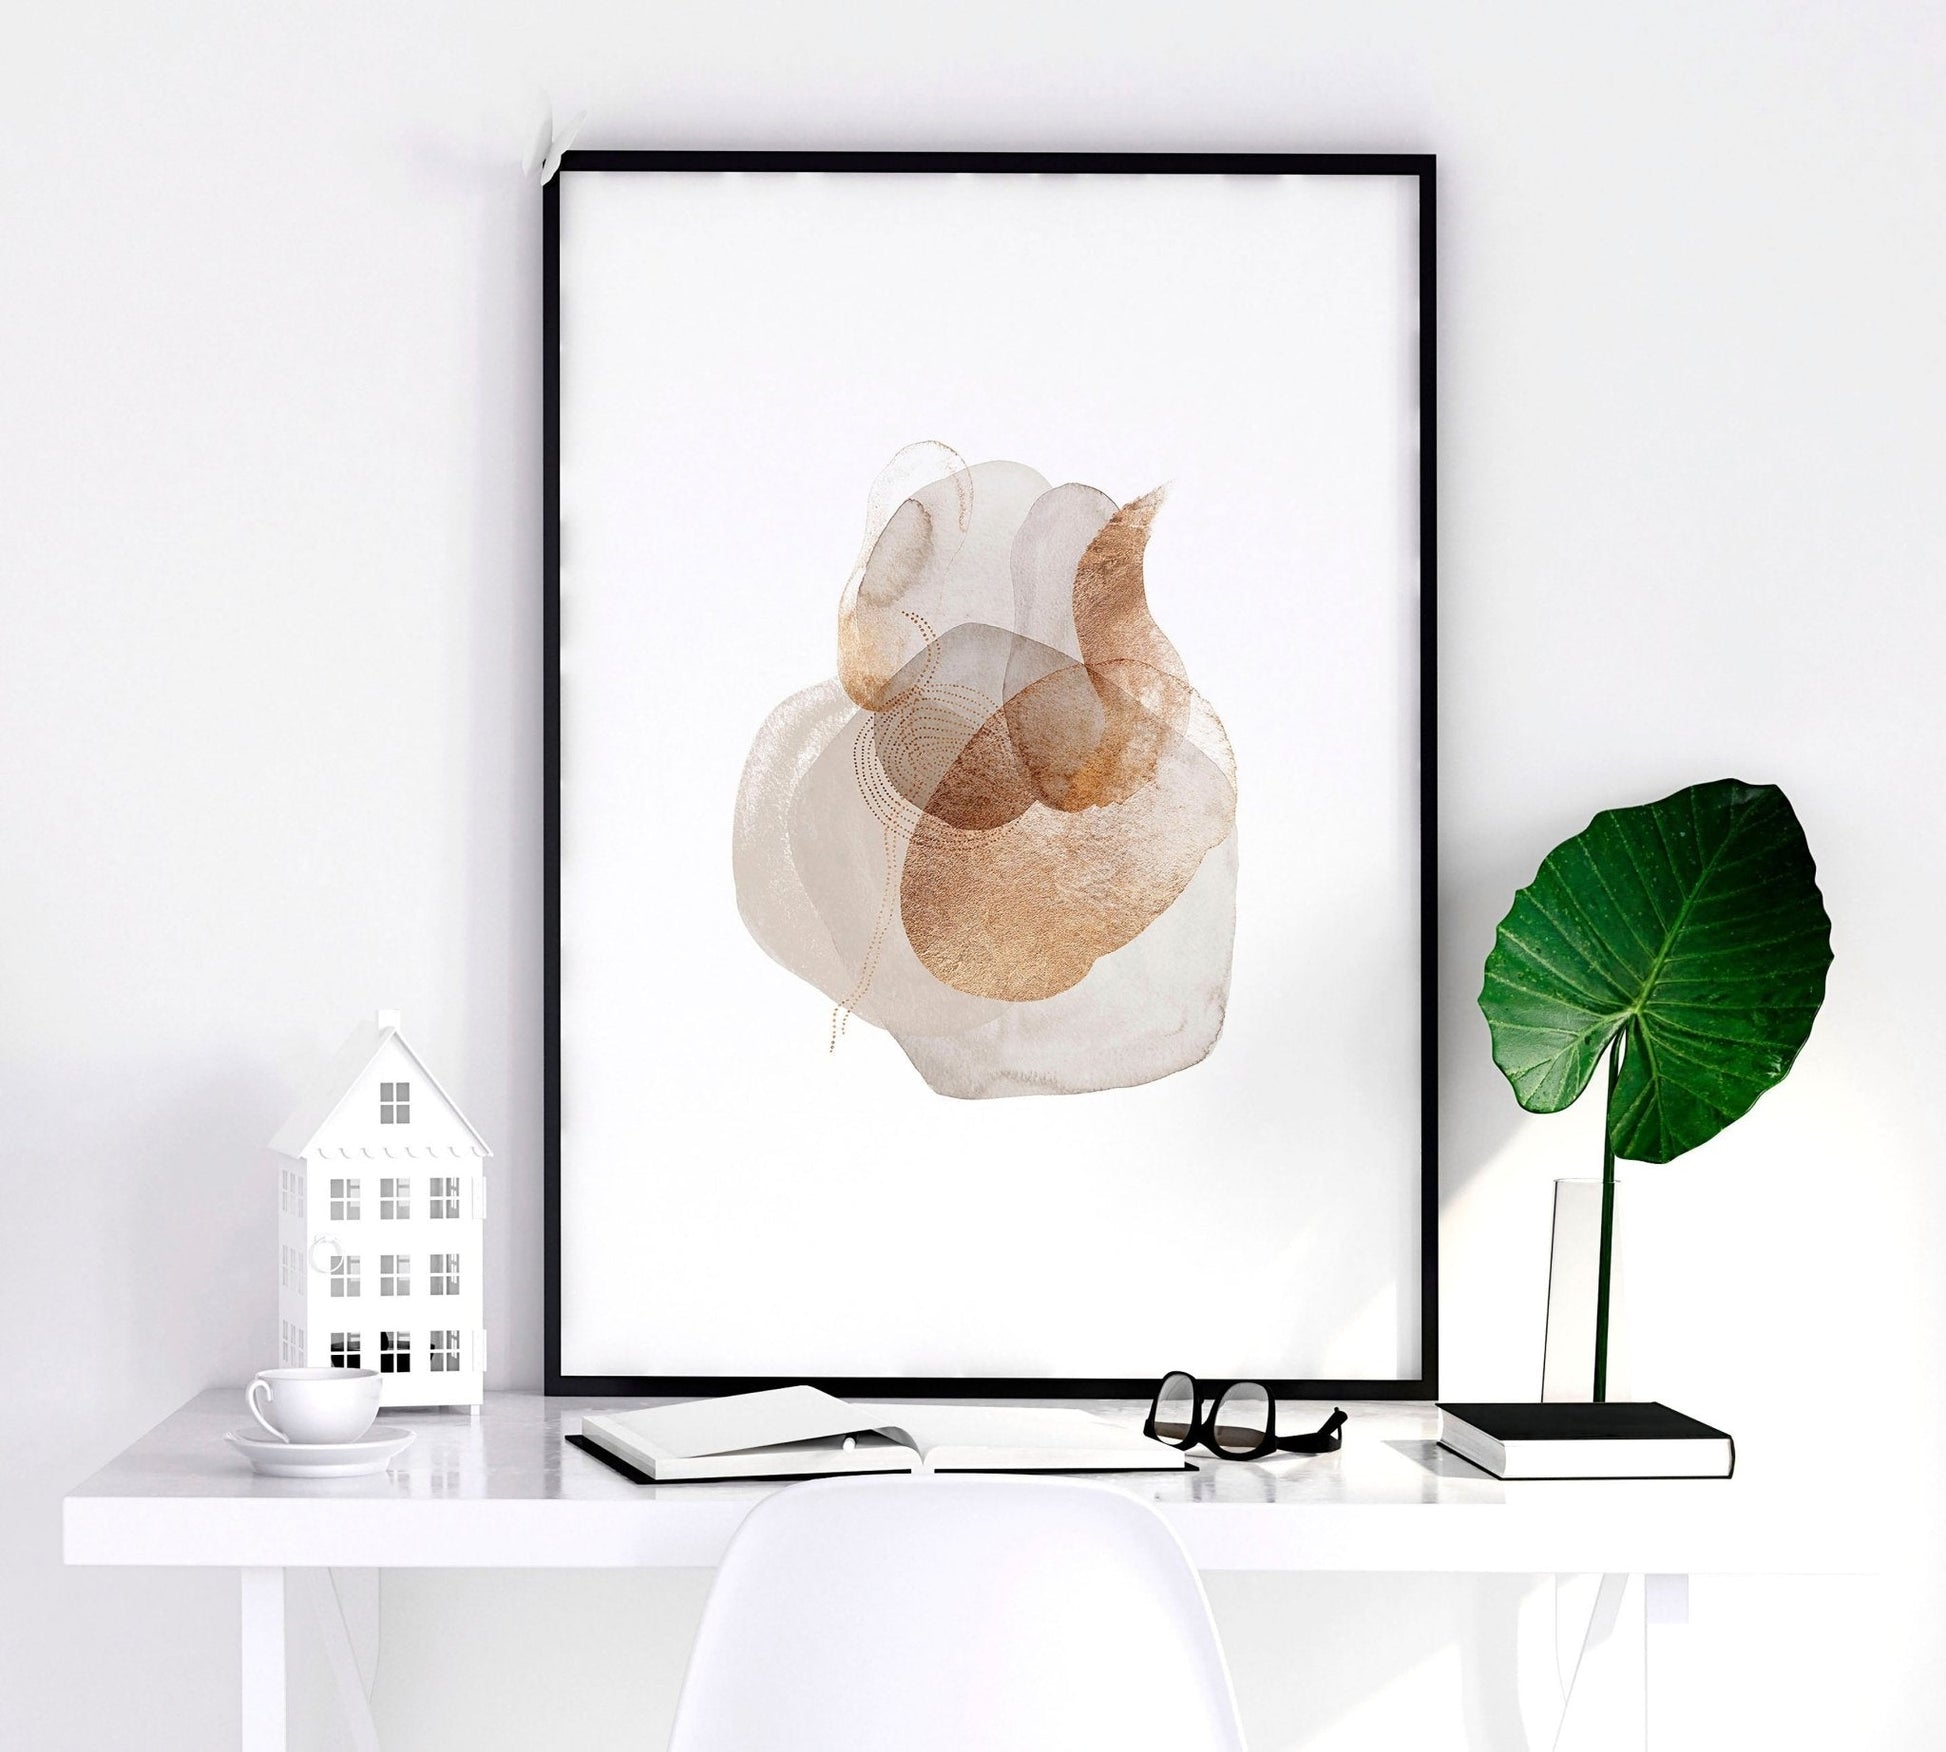 Mid century modern accent wall - Set of 3 abstract framed wall art prints - About Wall Art